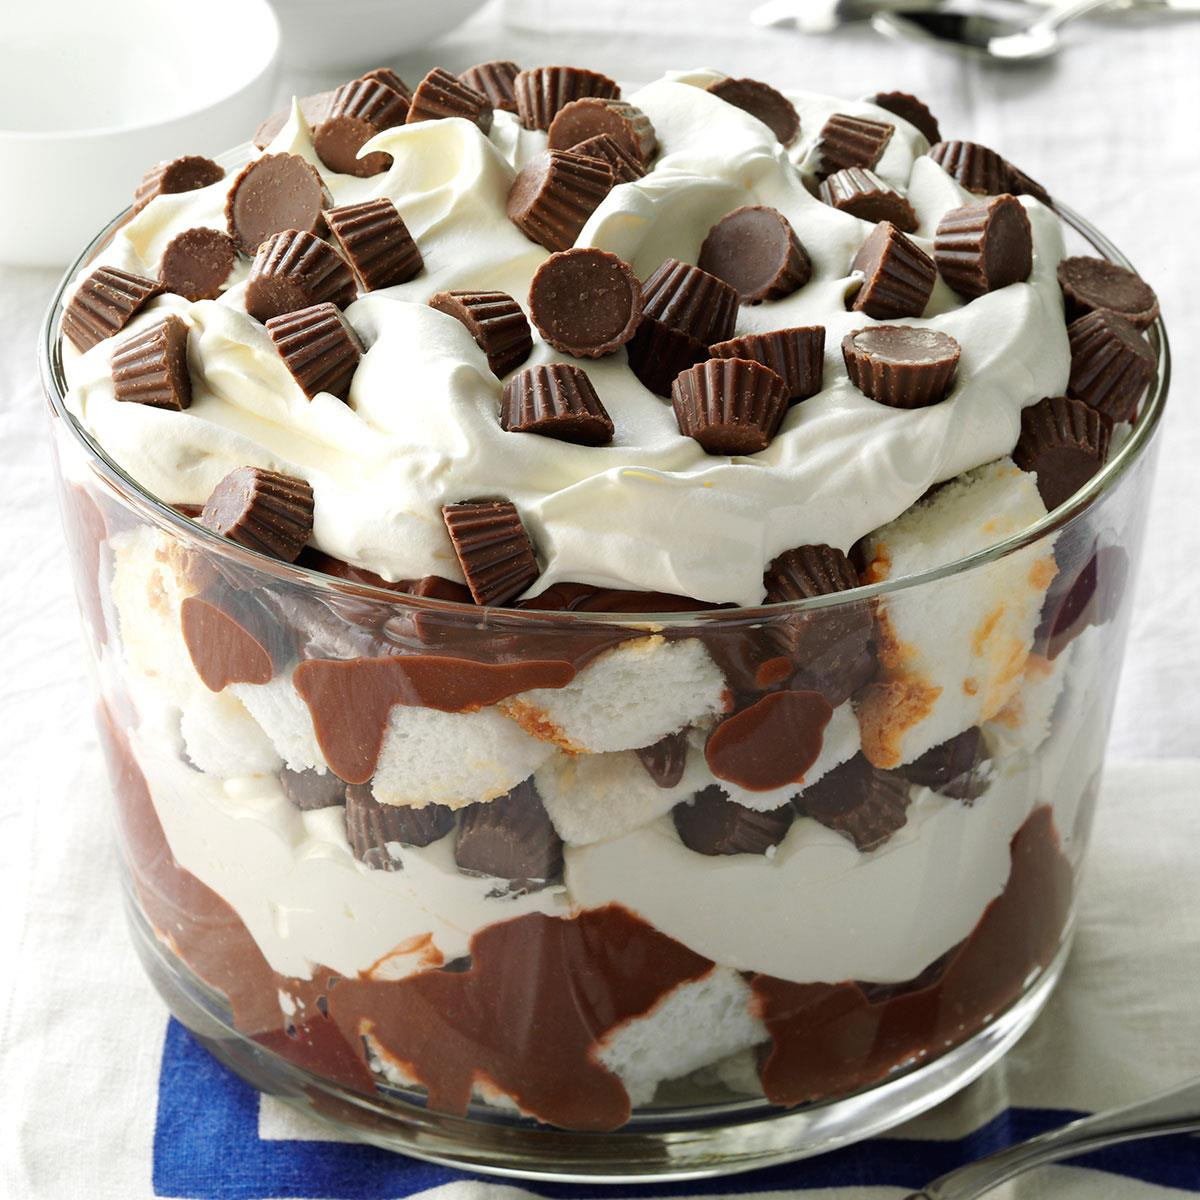 Easy To Make Healthy Desserts
 Peanut Butter Cup Trifle Recipe